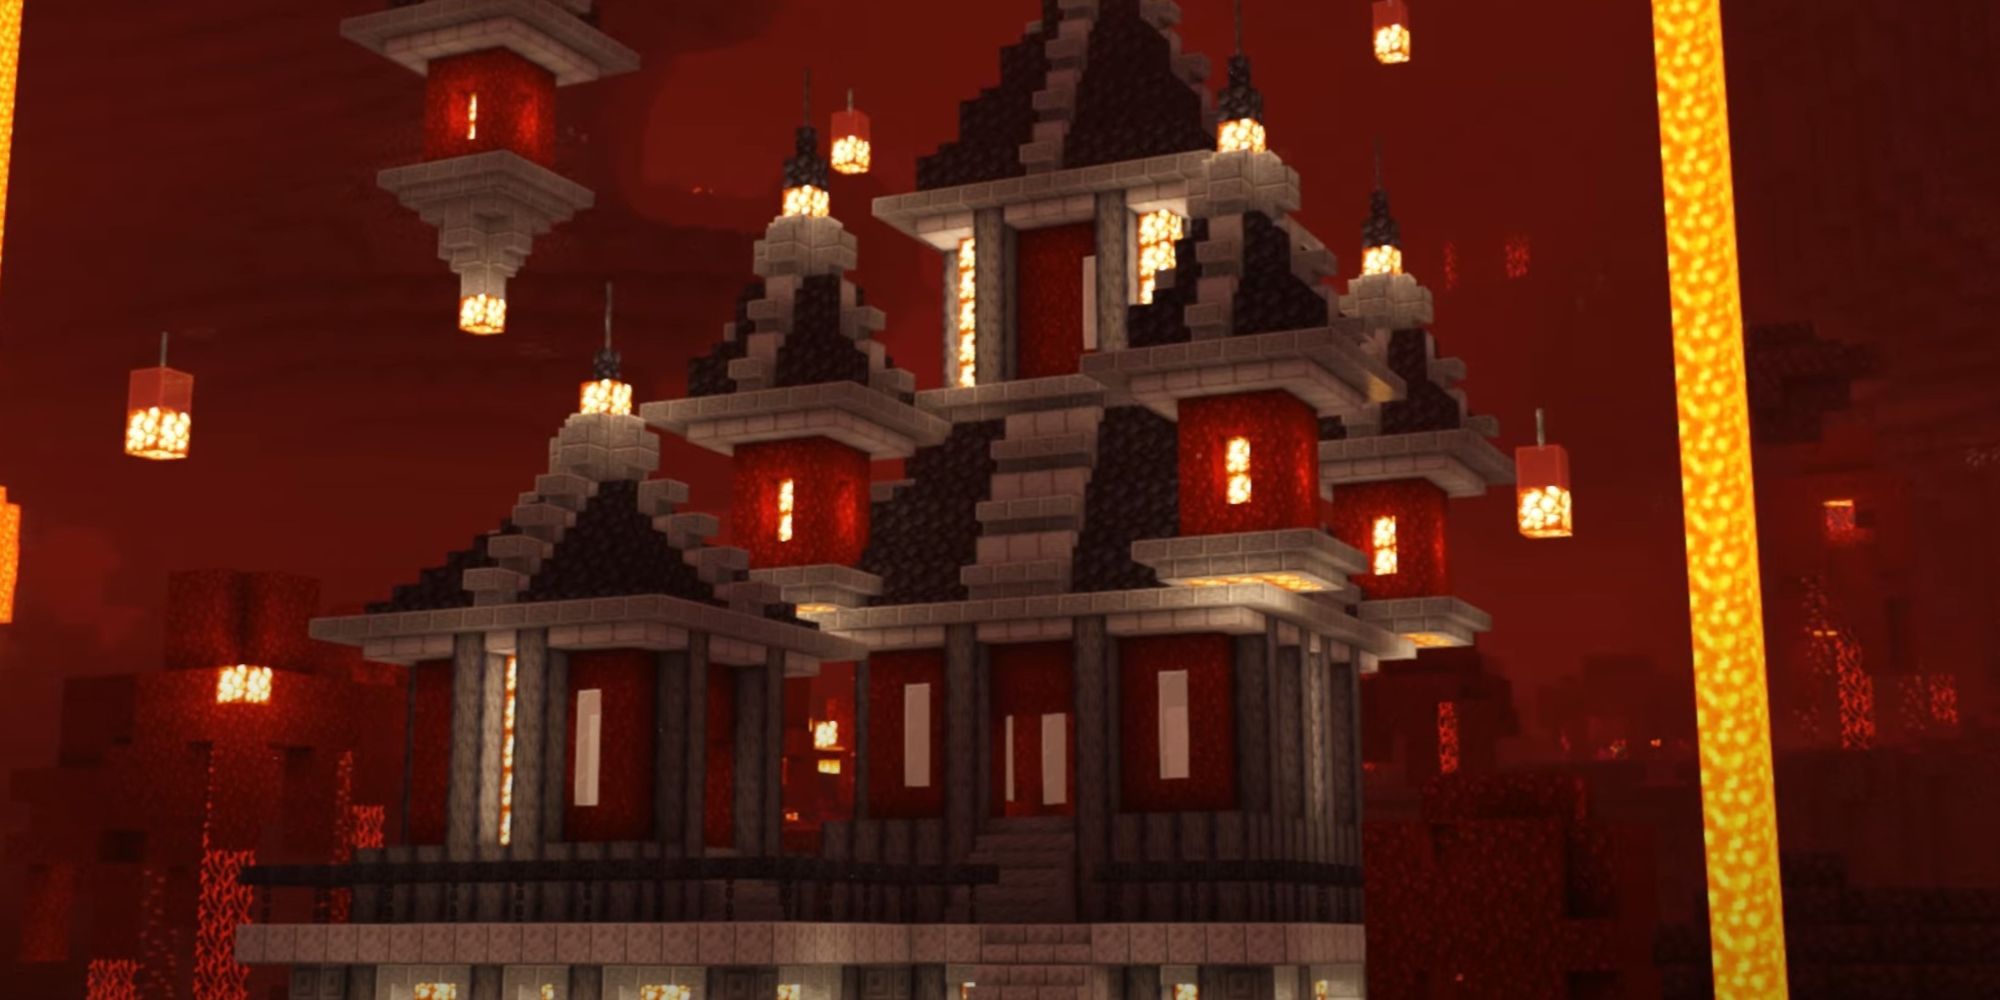 An image from Minecraft of a nether house that has a fantasy aesthetic. This house is made out of crimson blocks and has floating light sources all around the property.